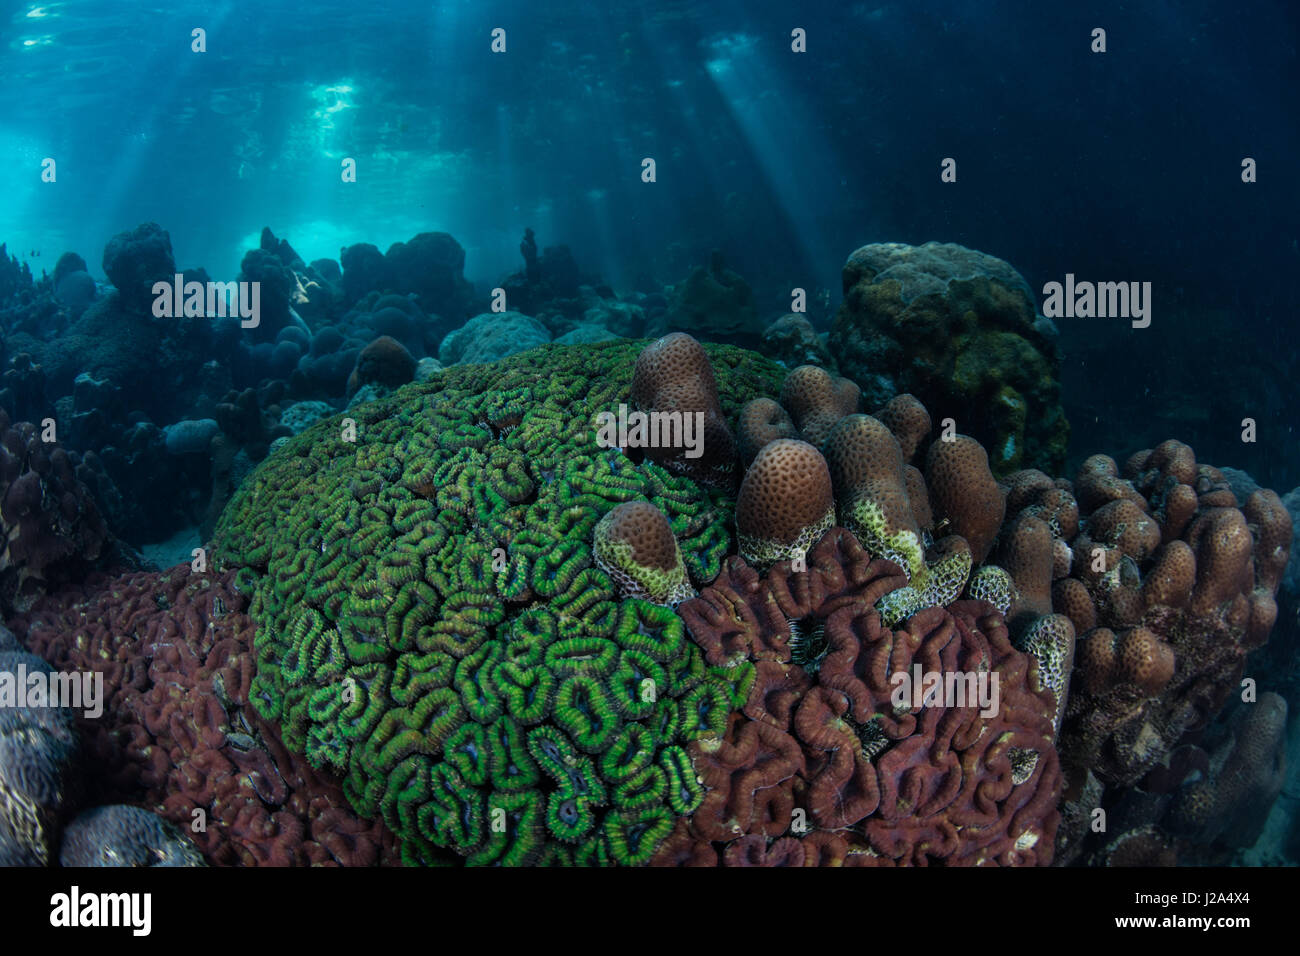 Colorful reef-building corals (Lobophyllia sp.) grow in Palau's inner lagoon. Stock Photo